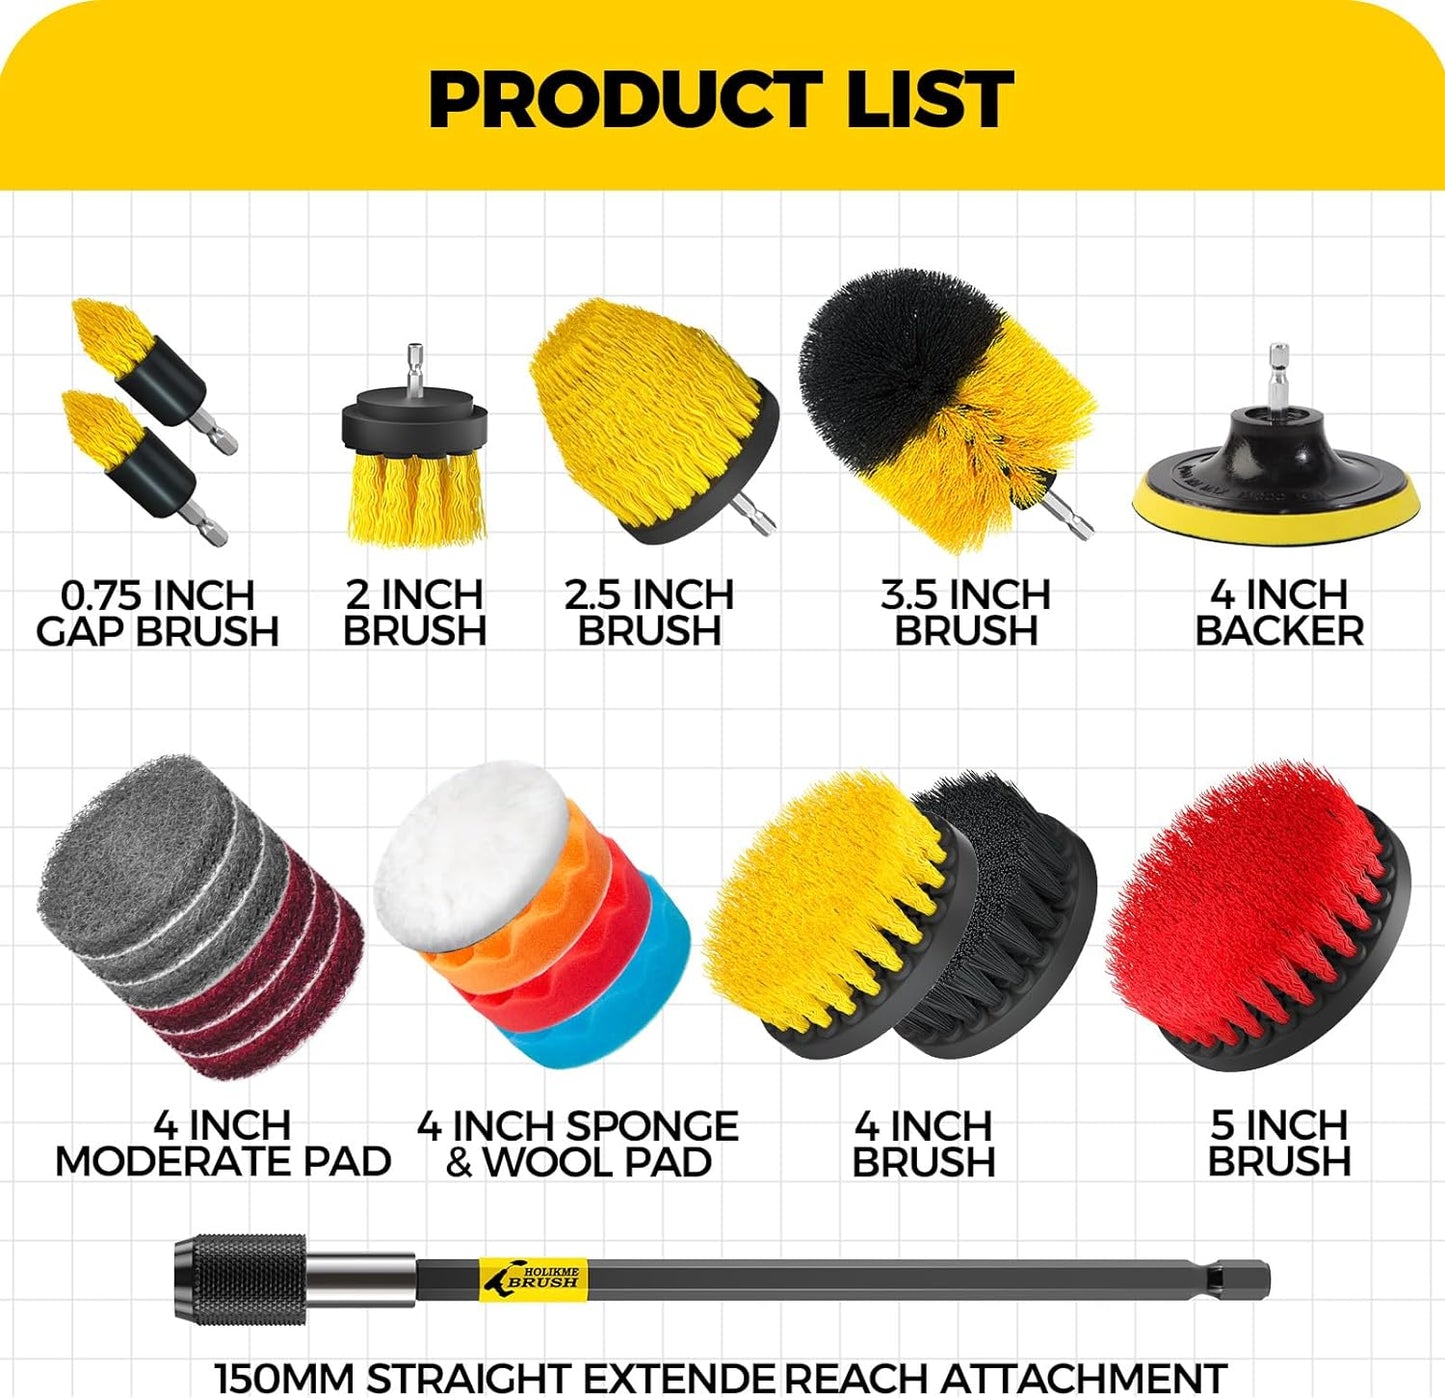 20Pack Drill Brush Attachments Set, Scrub Pads & Sponge, Buffing Pads, Extend Long Attachment